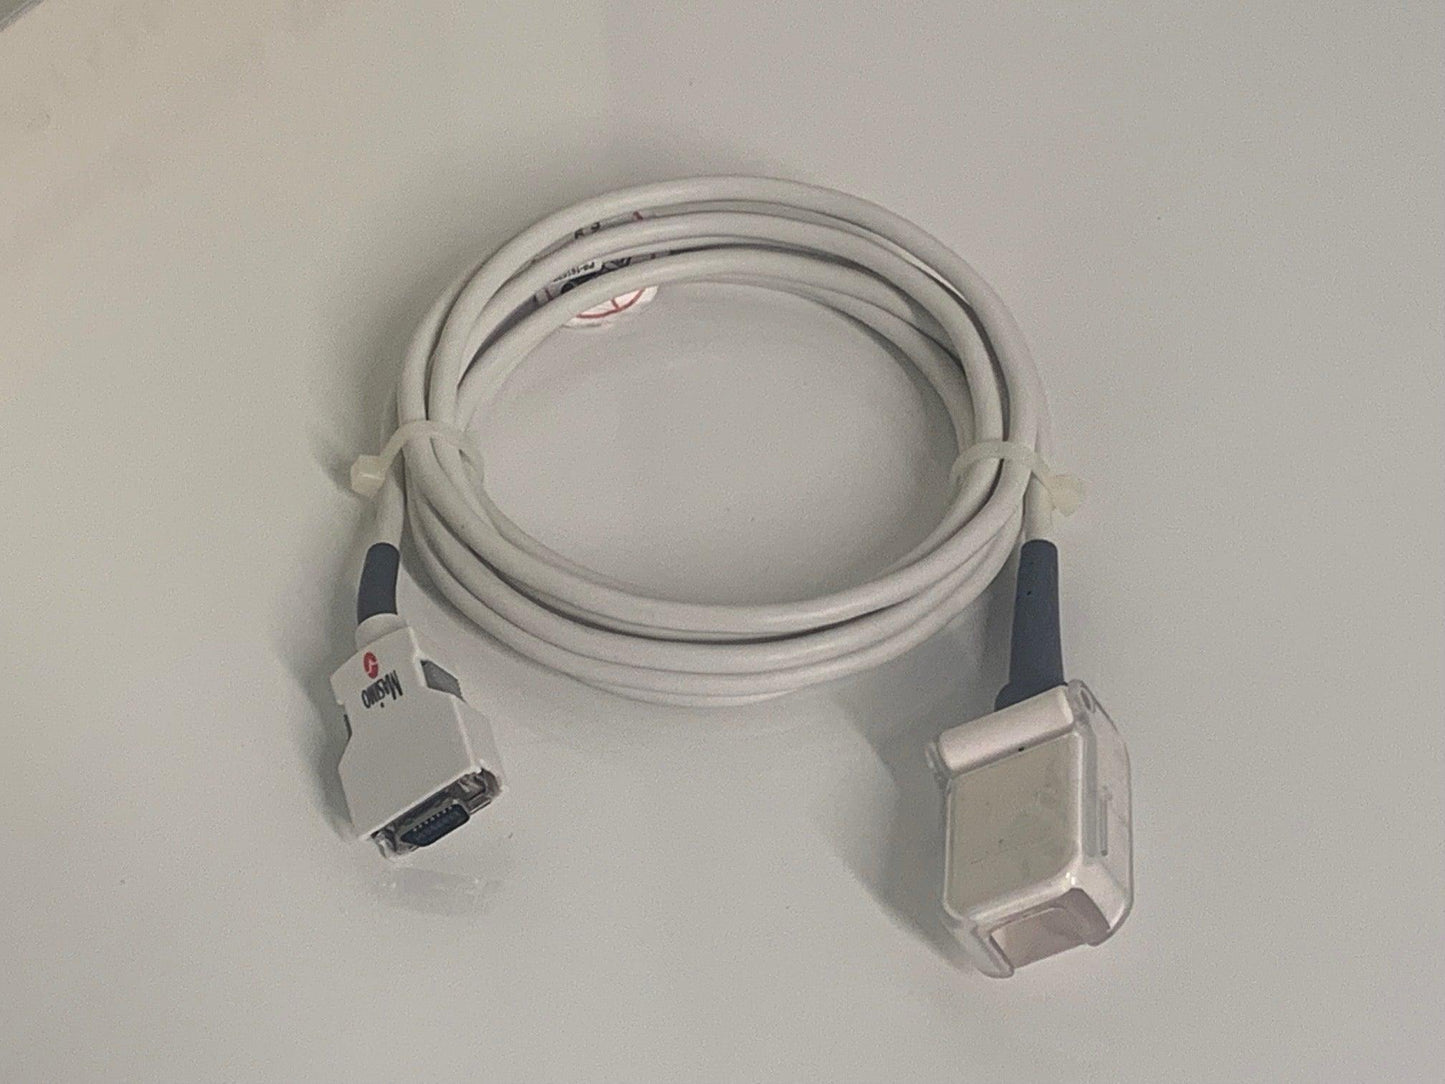 USED Masimo LNC-10 LNCS Direct Connect SpO2 Cable 1814 - MBR Medicals